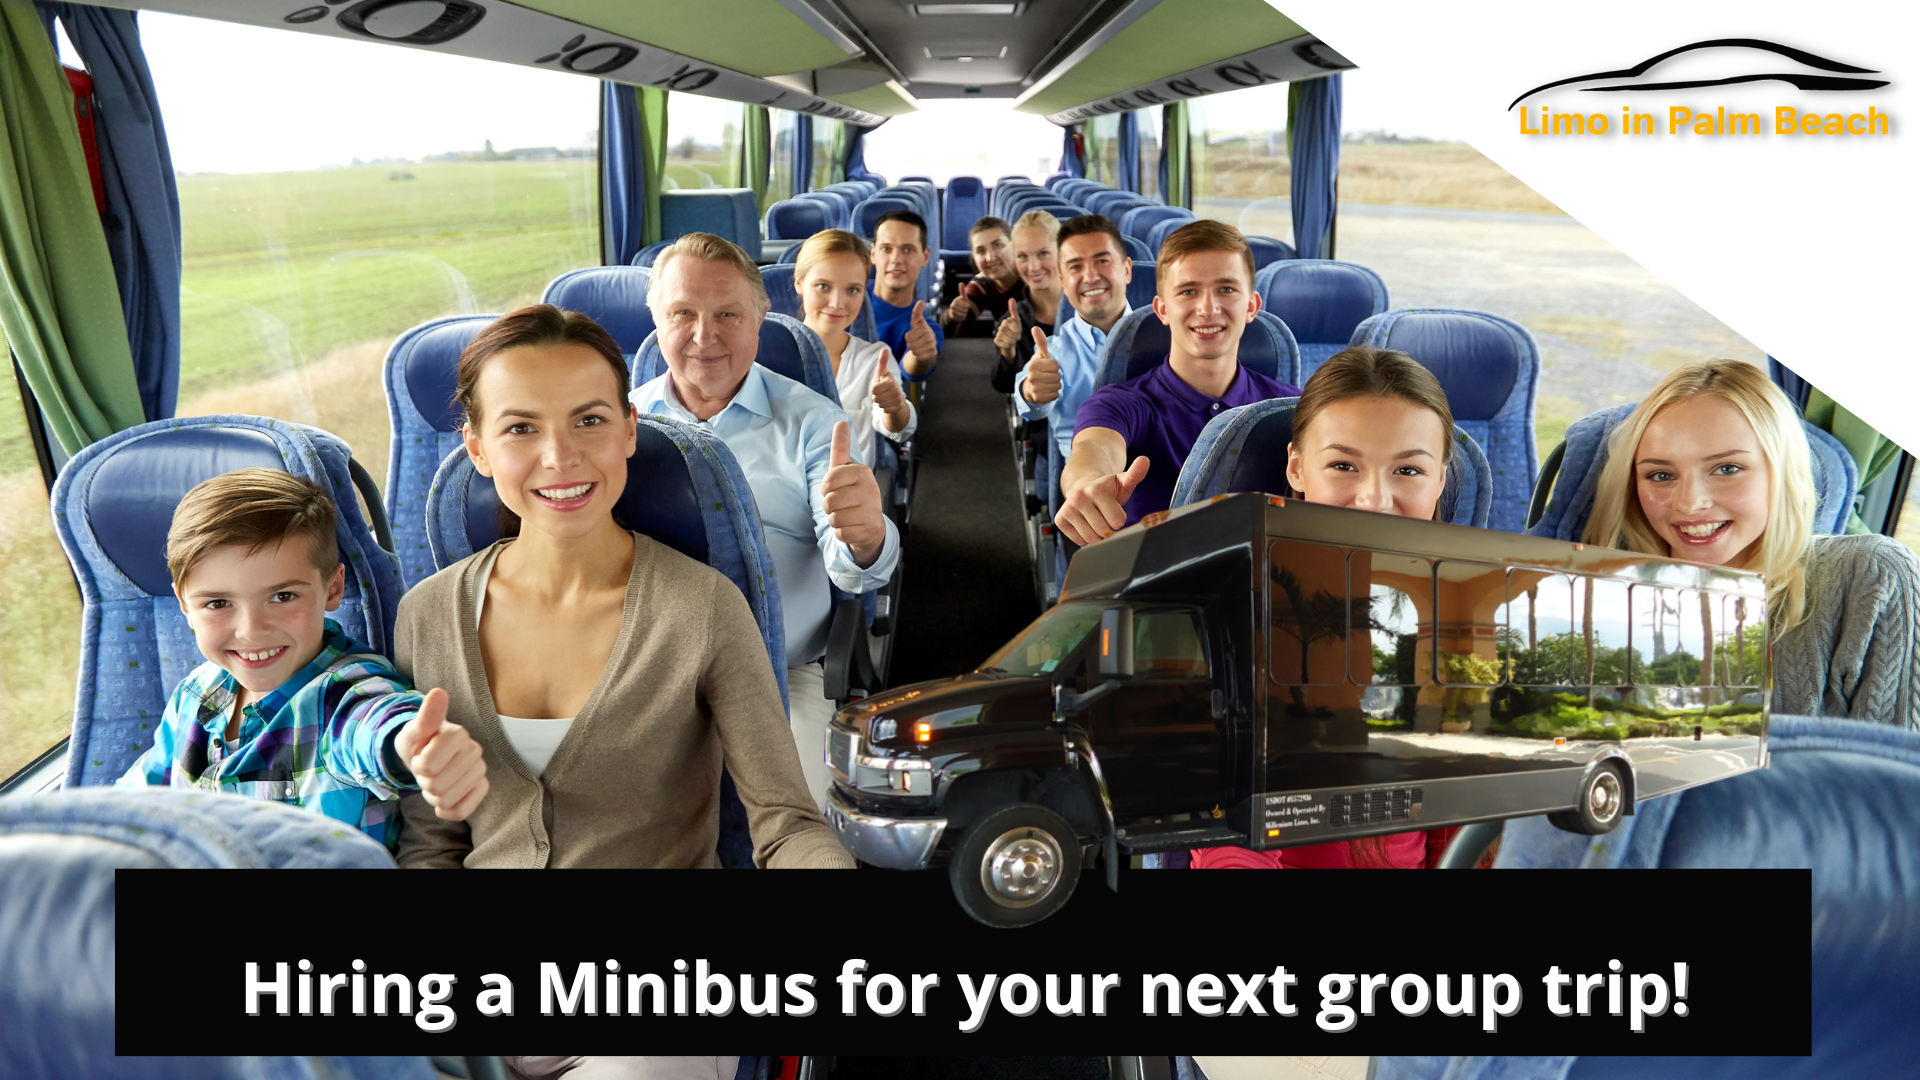  Hiring a Minibus for your next group trip!